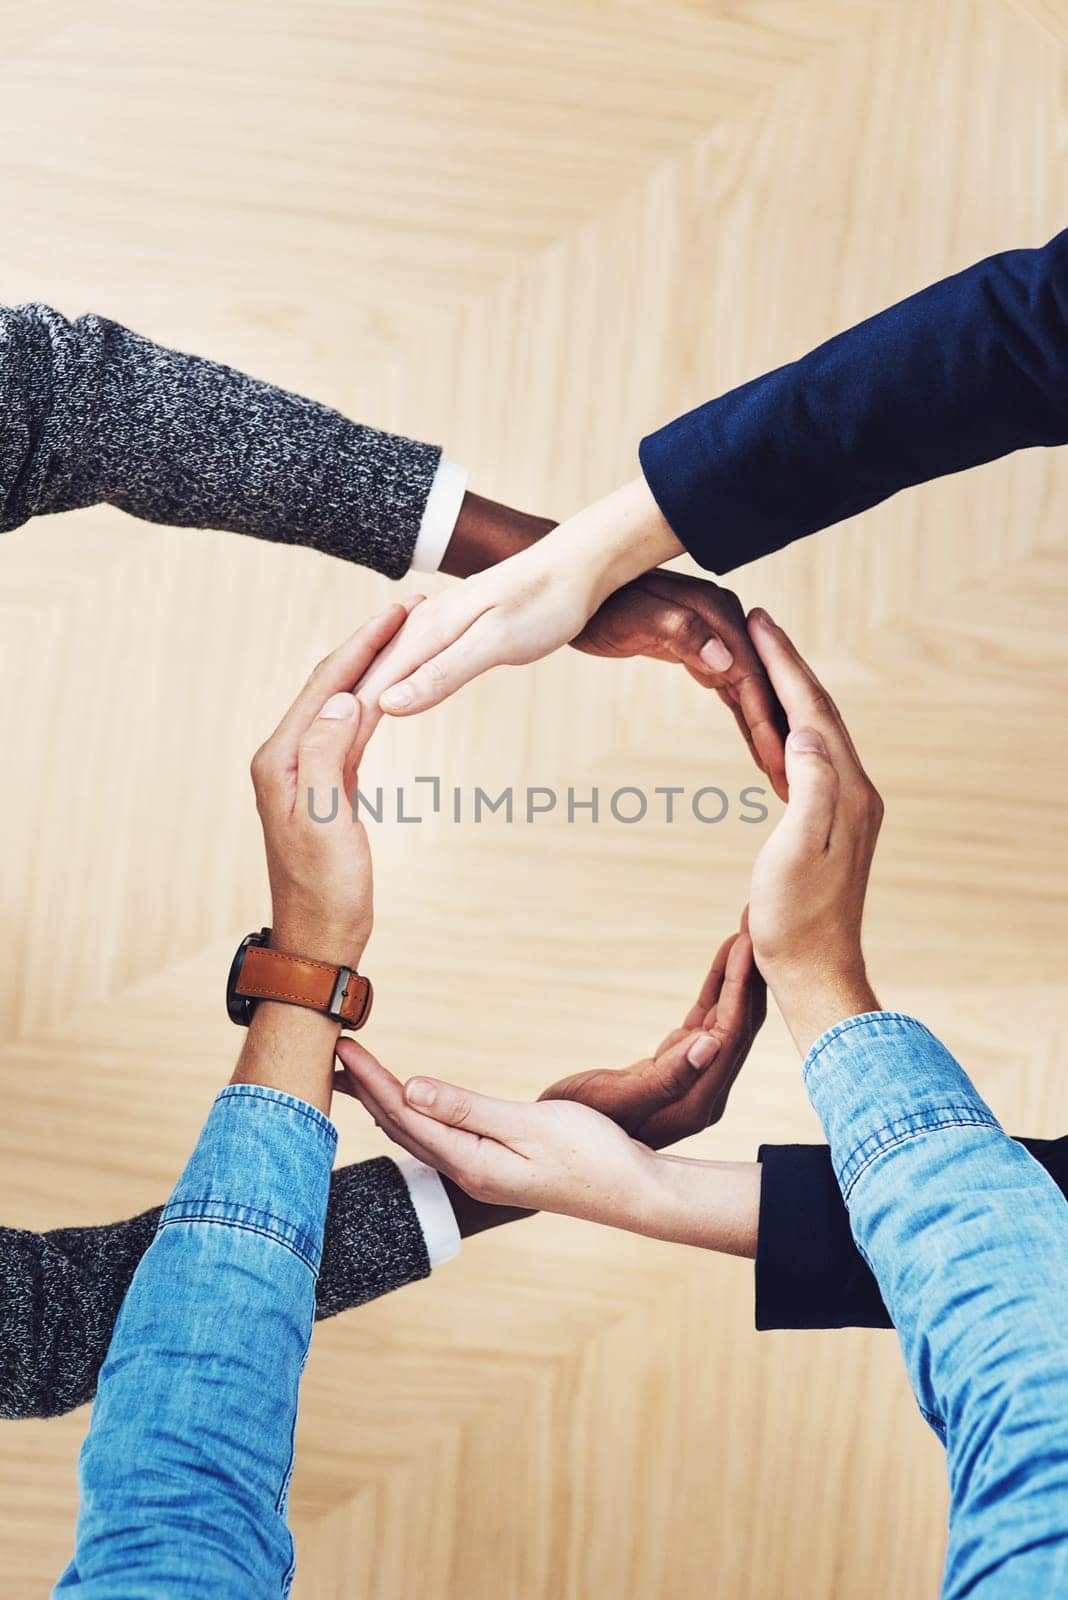 Above, recycling or hands of business people in circle for motivation, support or sustainability in office. Teamwork, recycle or employees for sustainable goals, community help or partnership group.